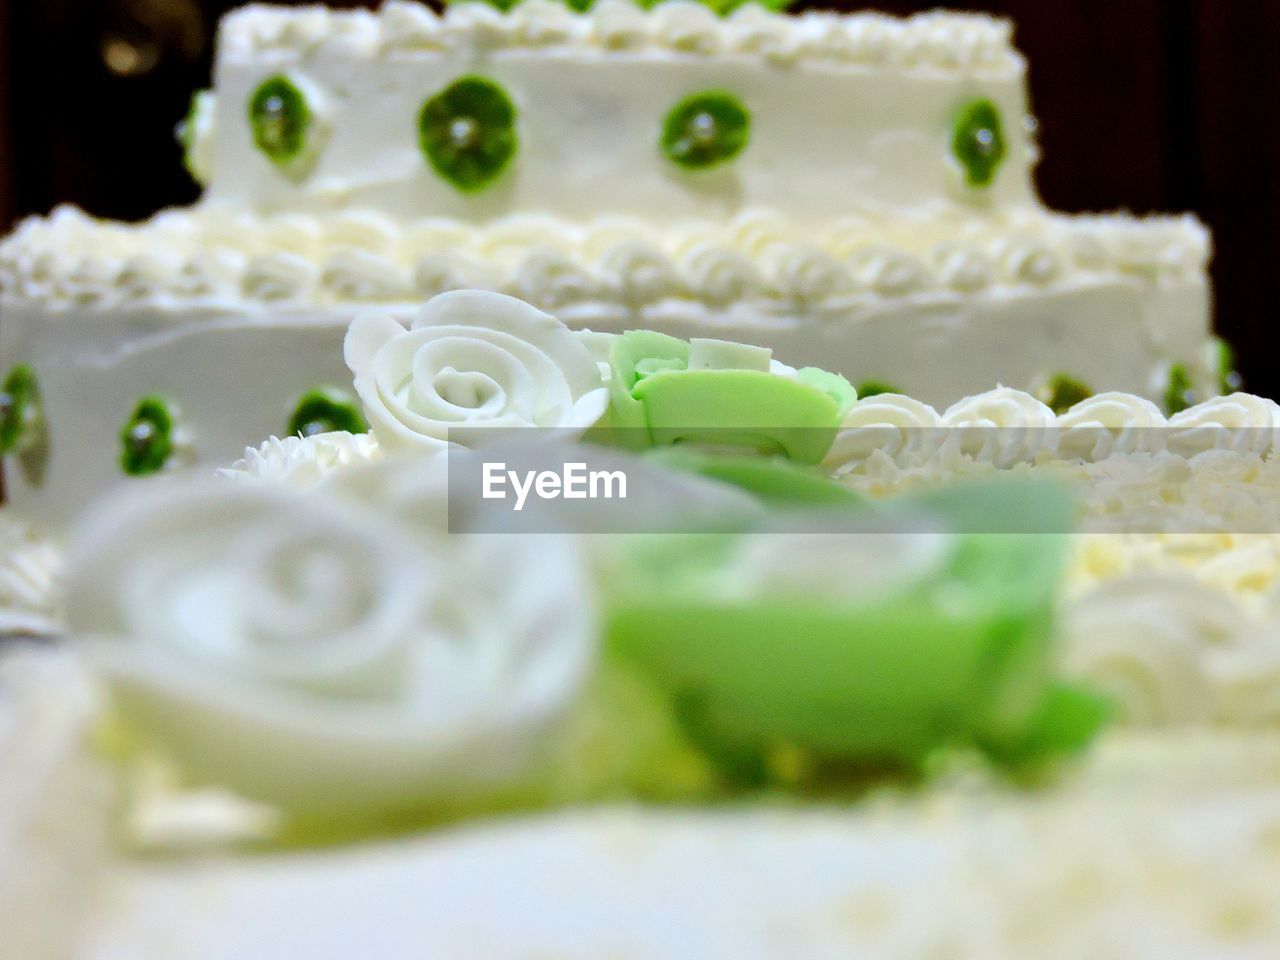 CLOSE-UP OF CAKE ON WHITE TABLE